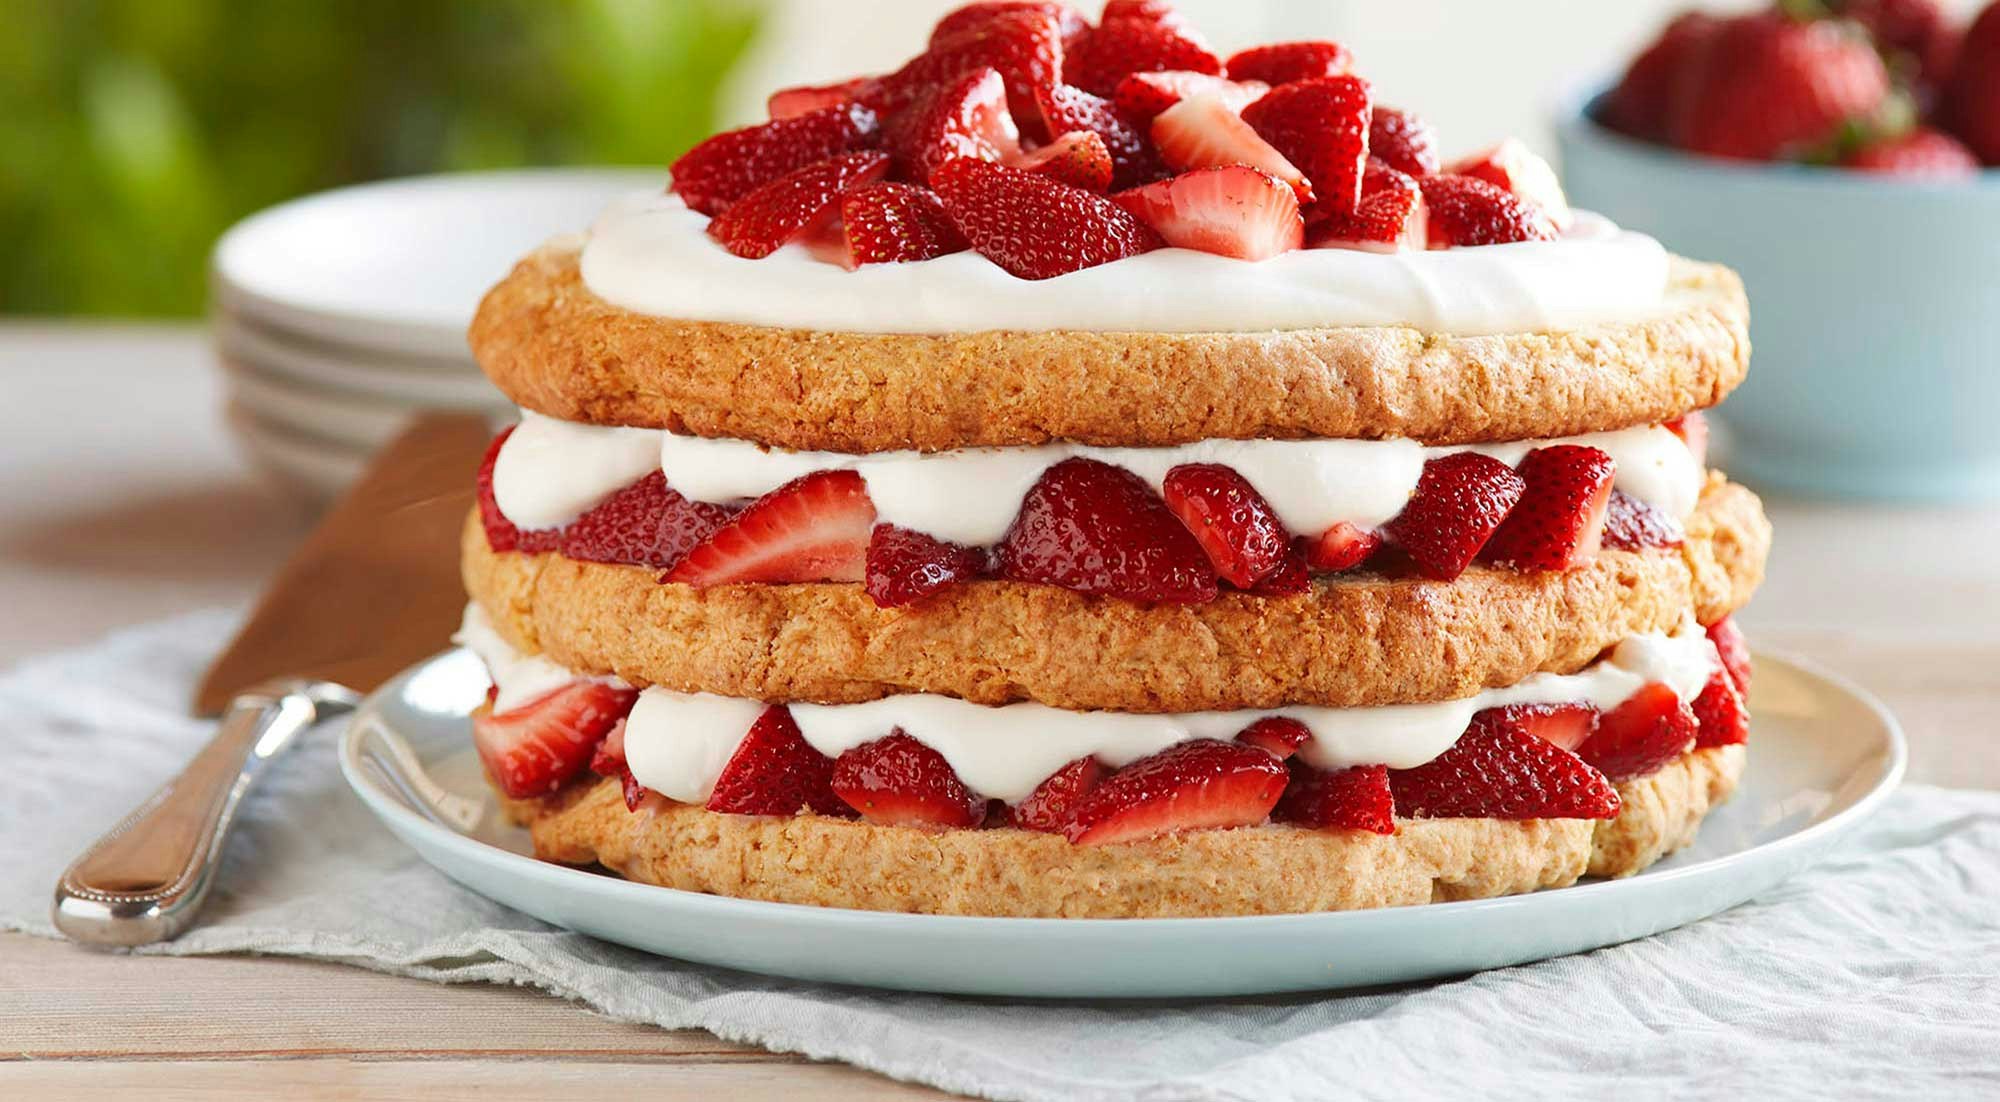 Strawberry shortcake piled with strawberries